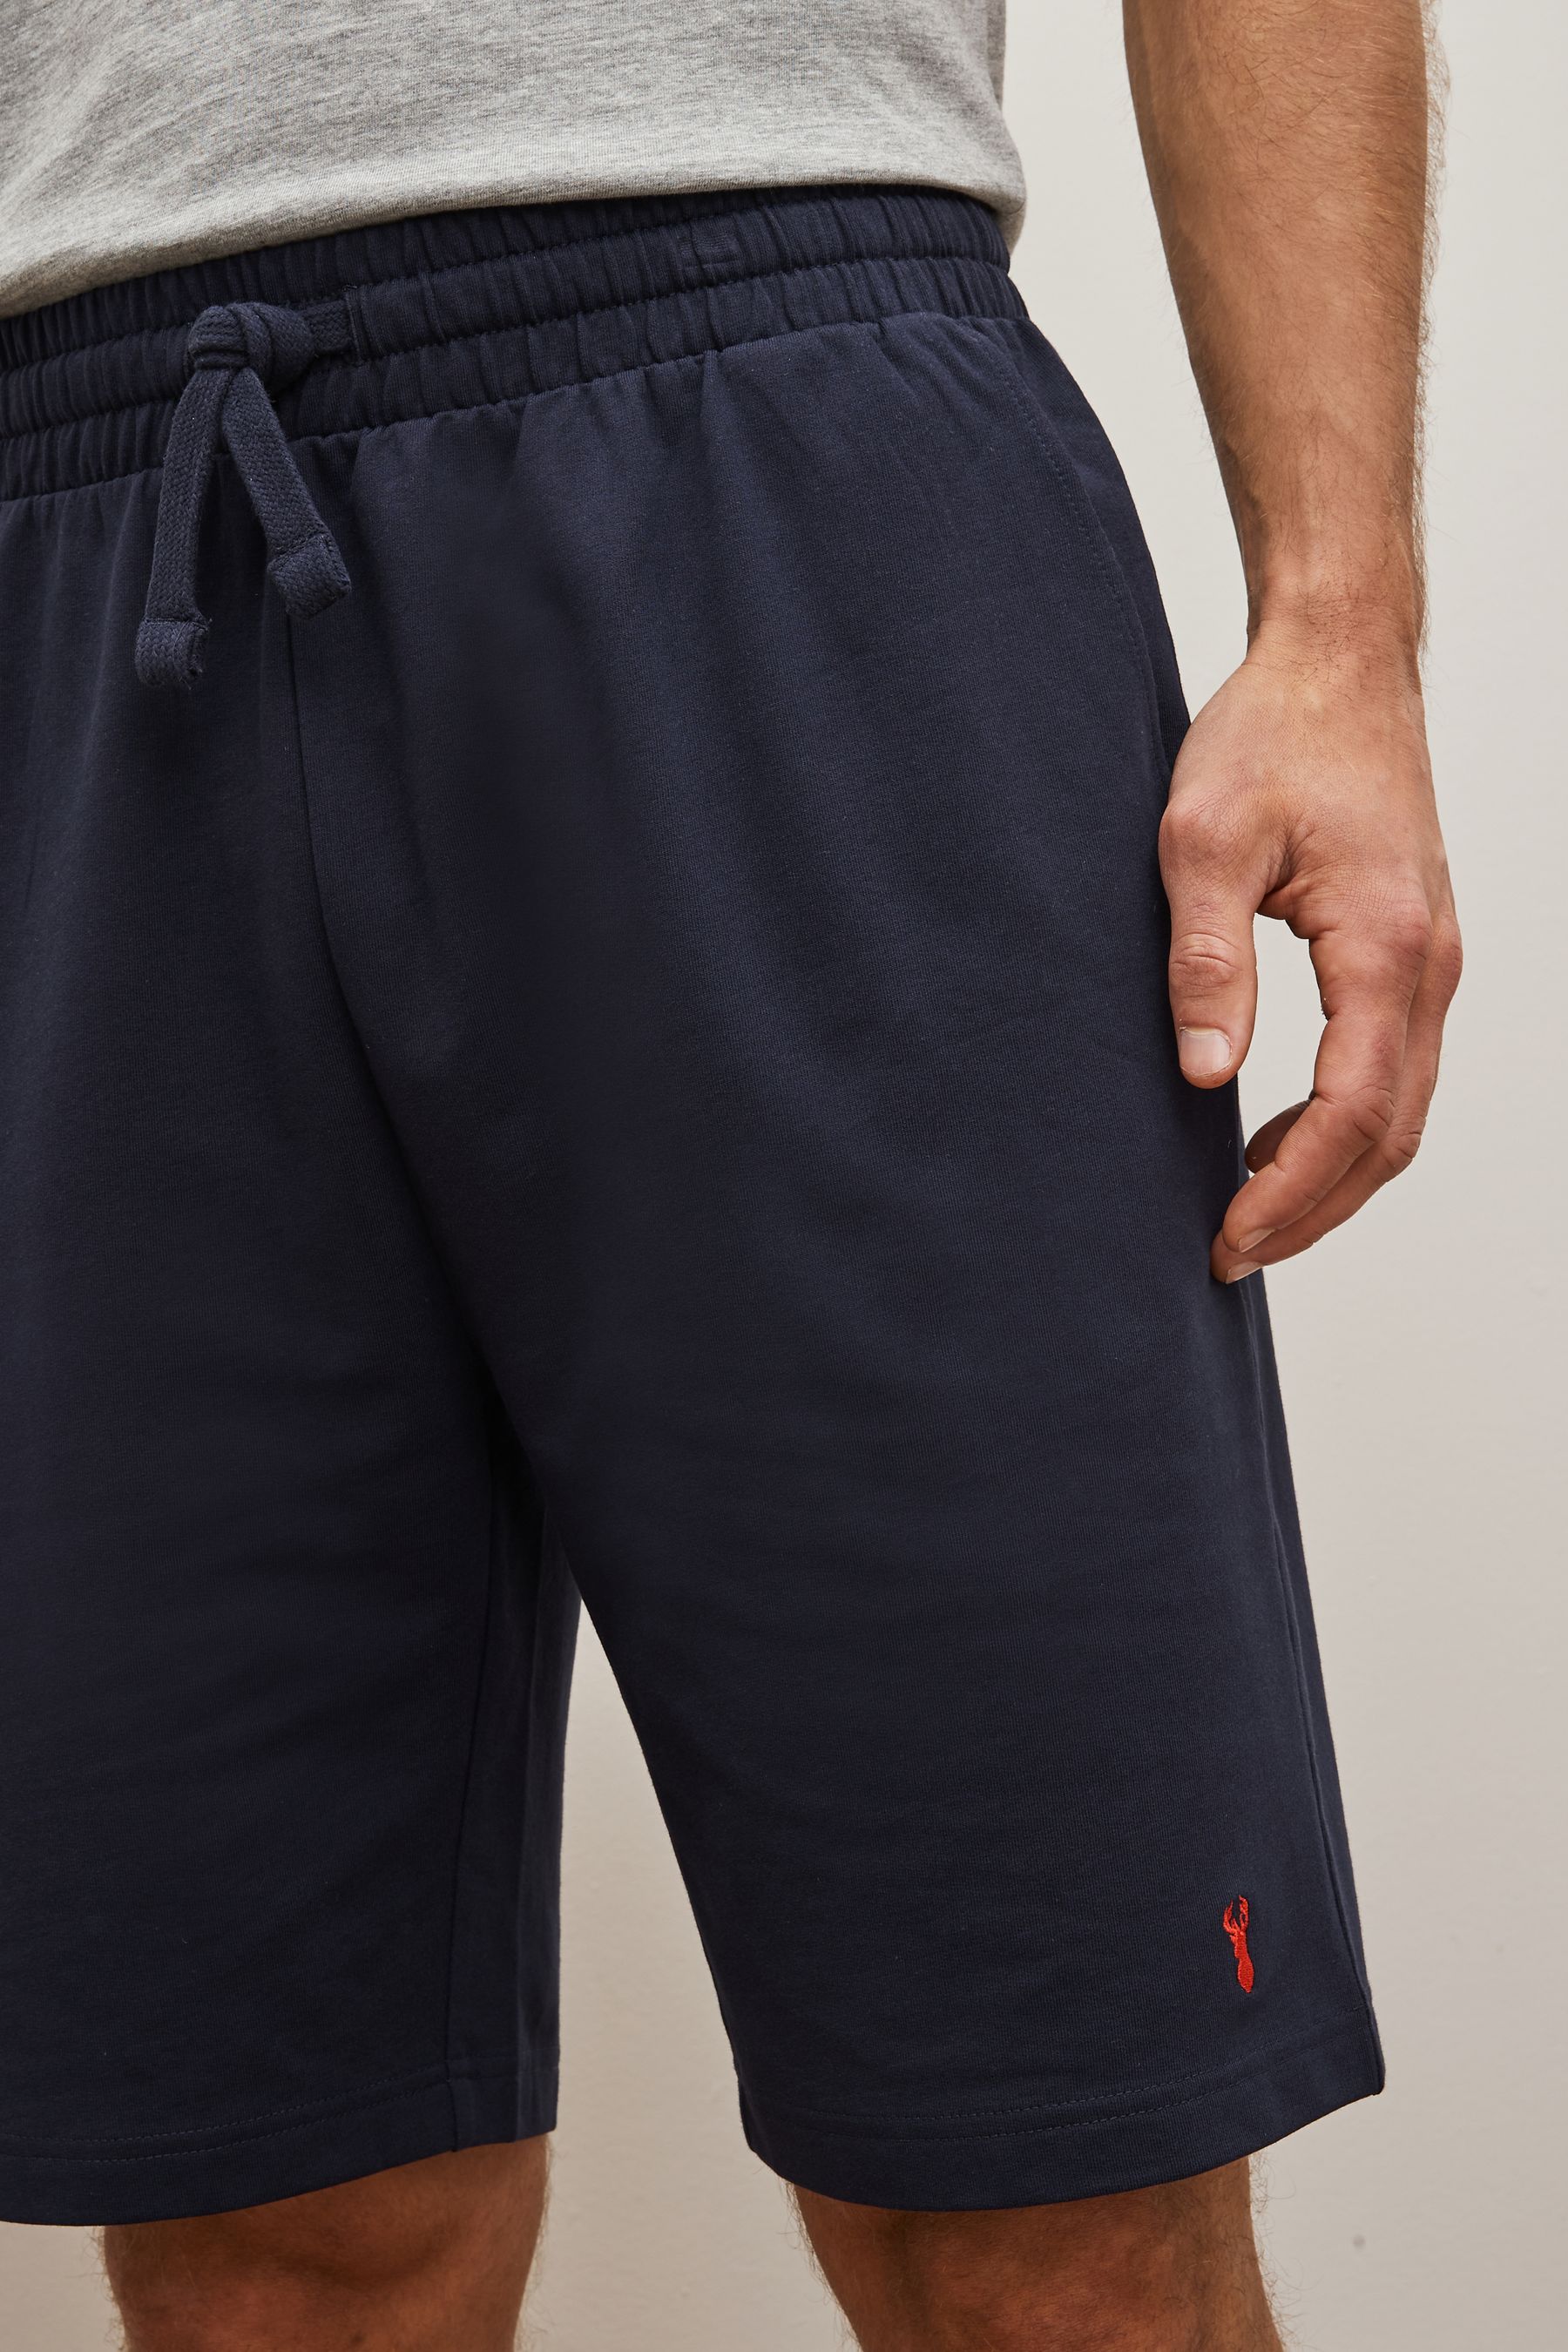 Buy Navy Blue Lightweight Shorts from the Next UK online shop